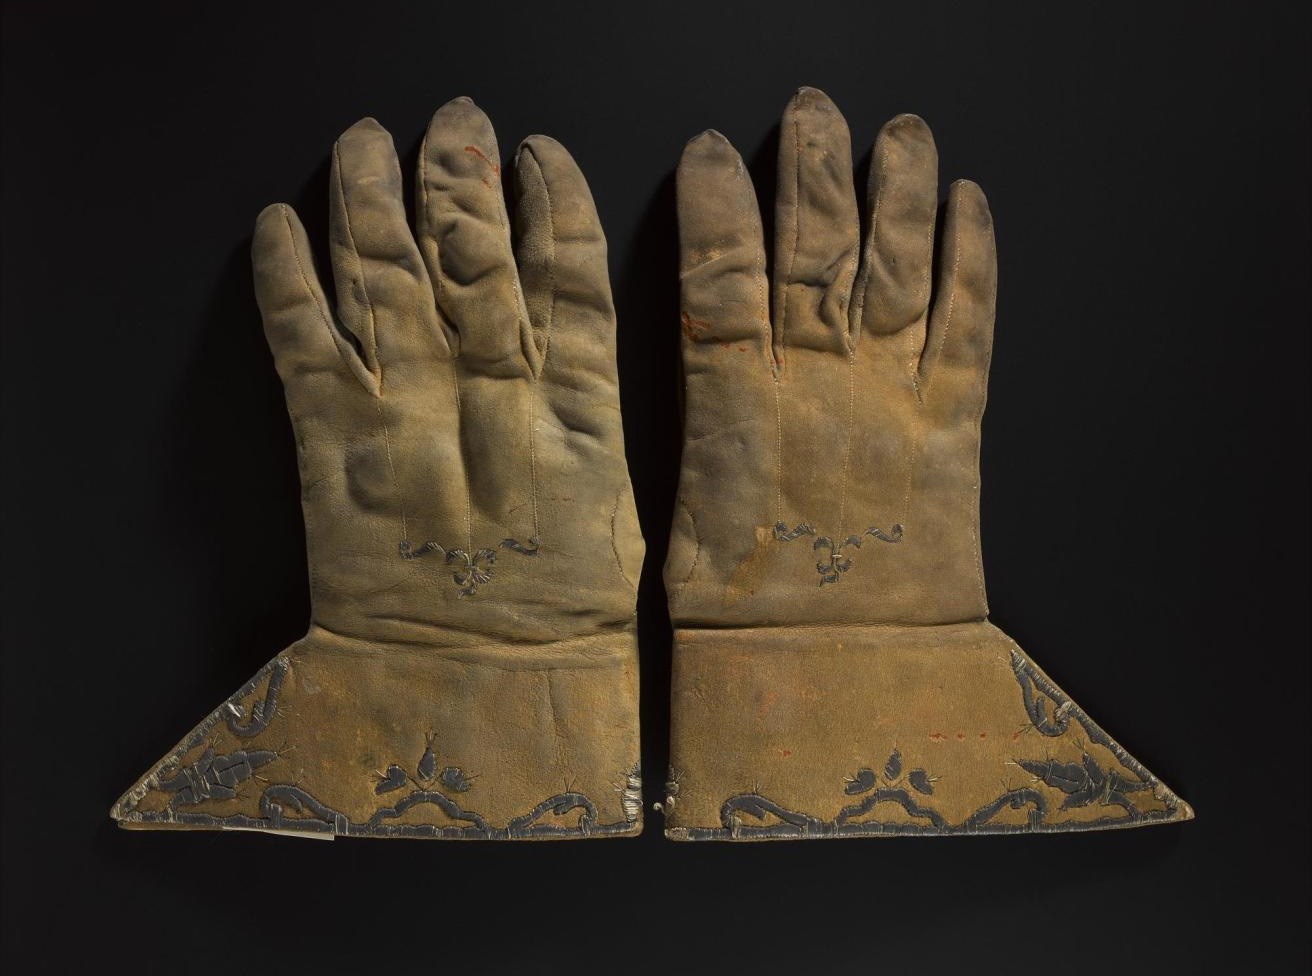 Pair of gloves said to have been worn by John Graham of Claverhouse, Viscount Dundee. Leather, silver wire, 17th century.